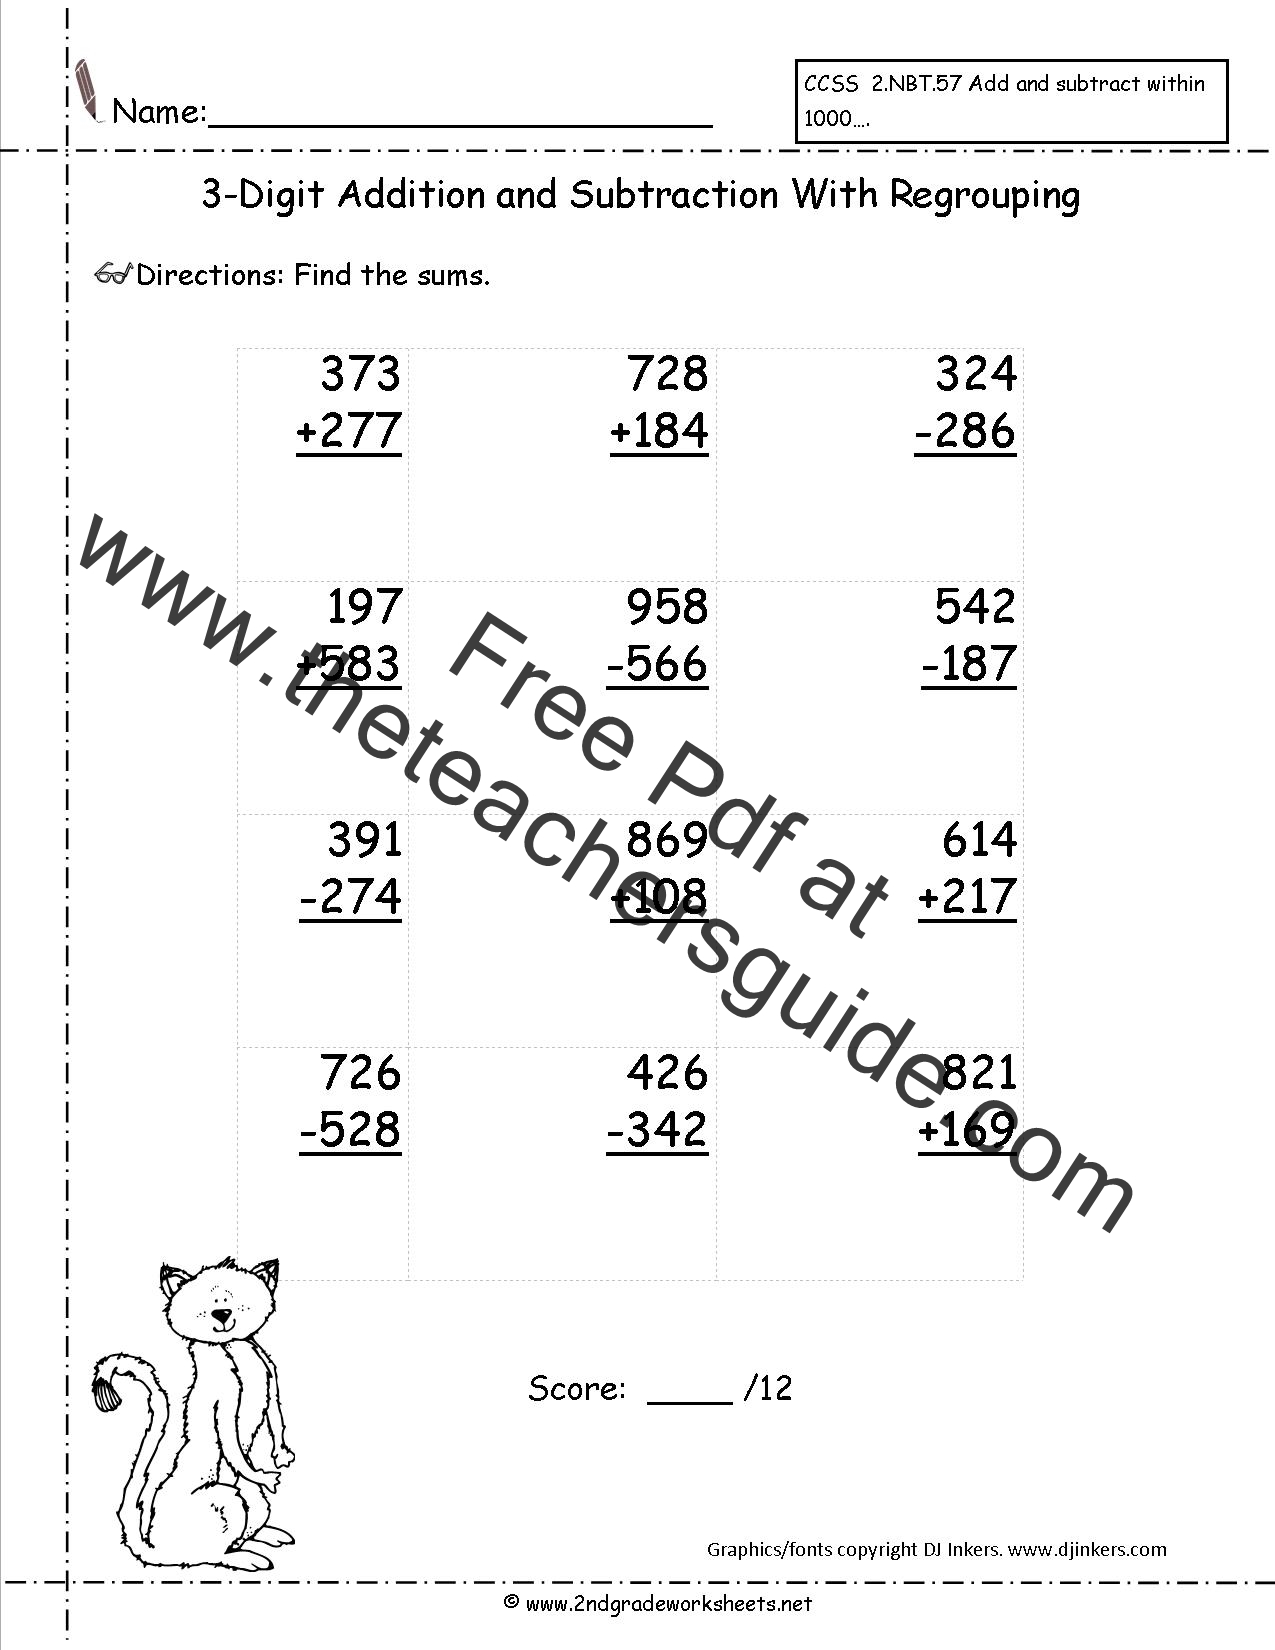 Three Digit Addition and Subtraction Worksheets from The Teacher's Guide